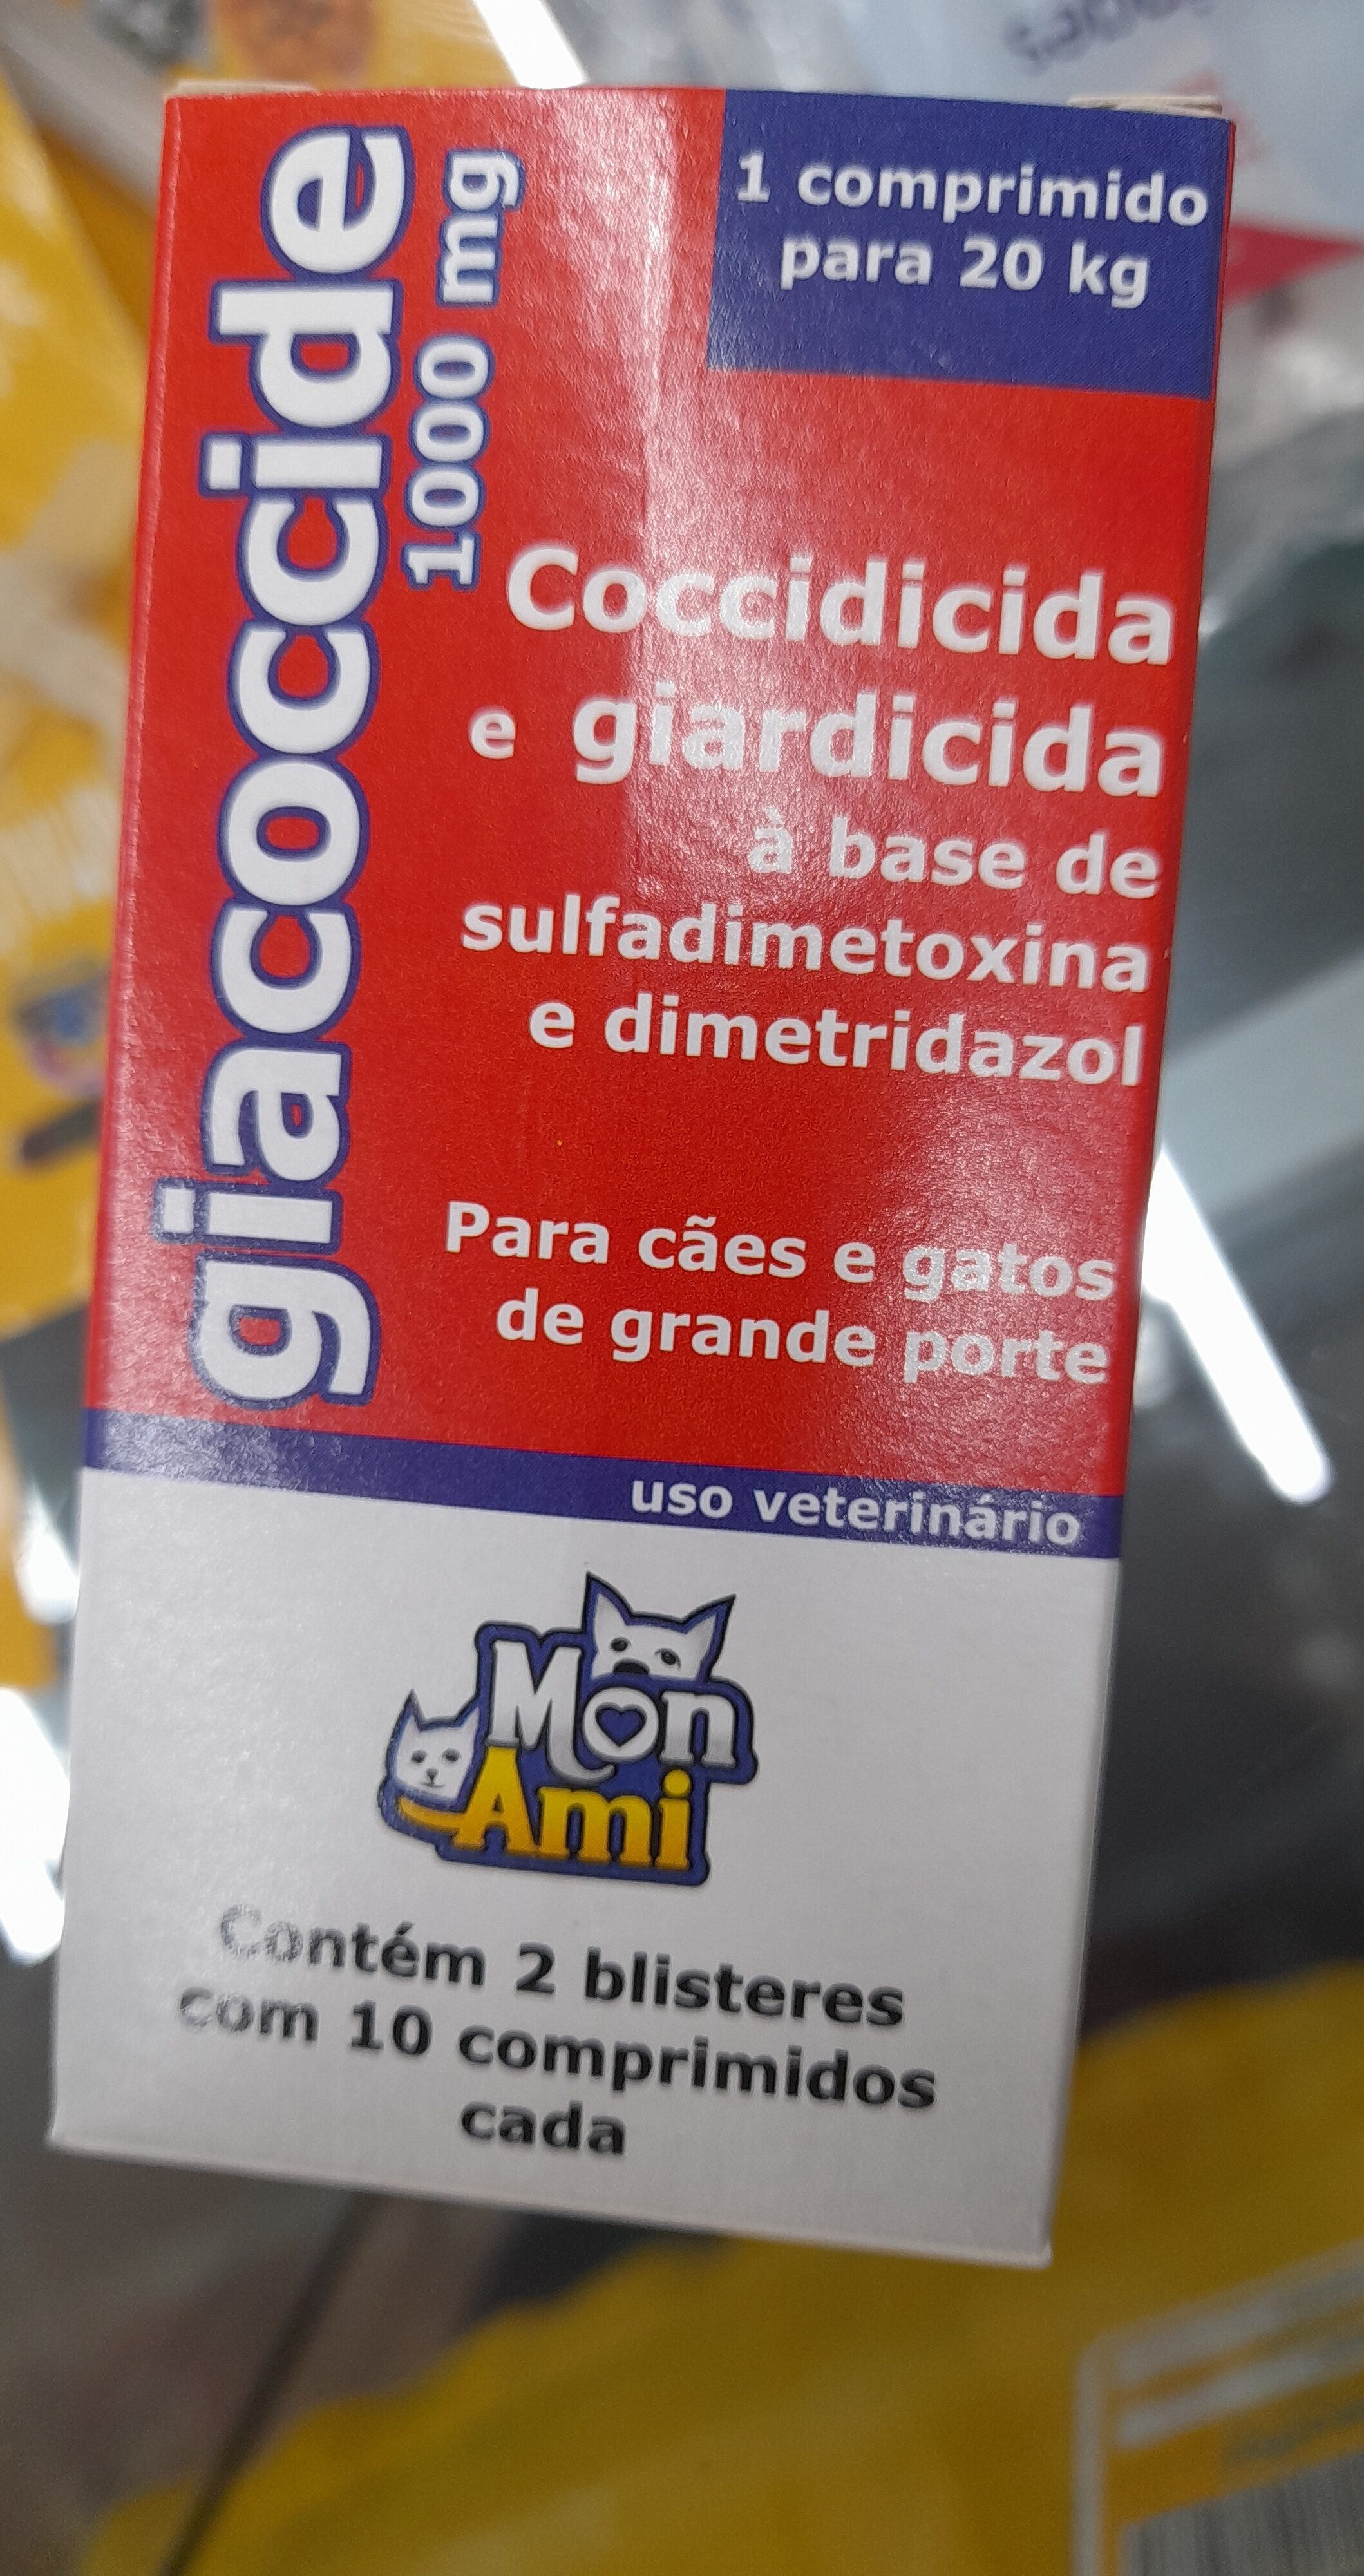 Med. Giacocide 1000mg - Product - pt